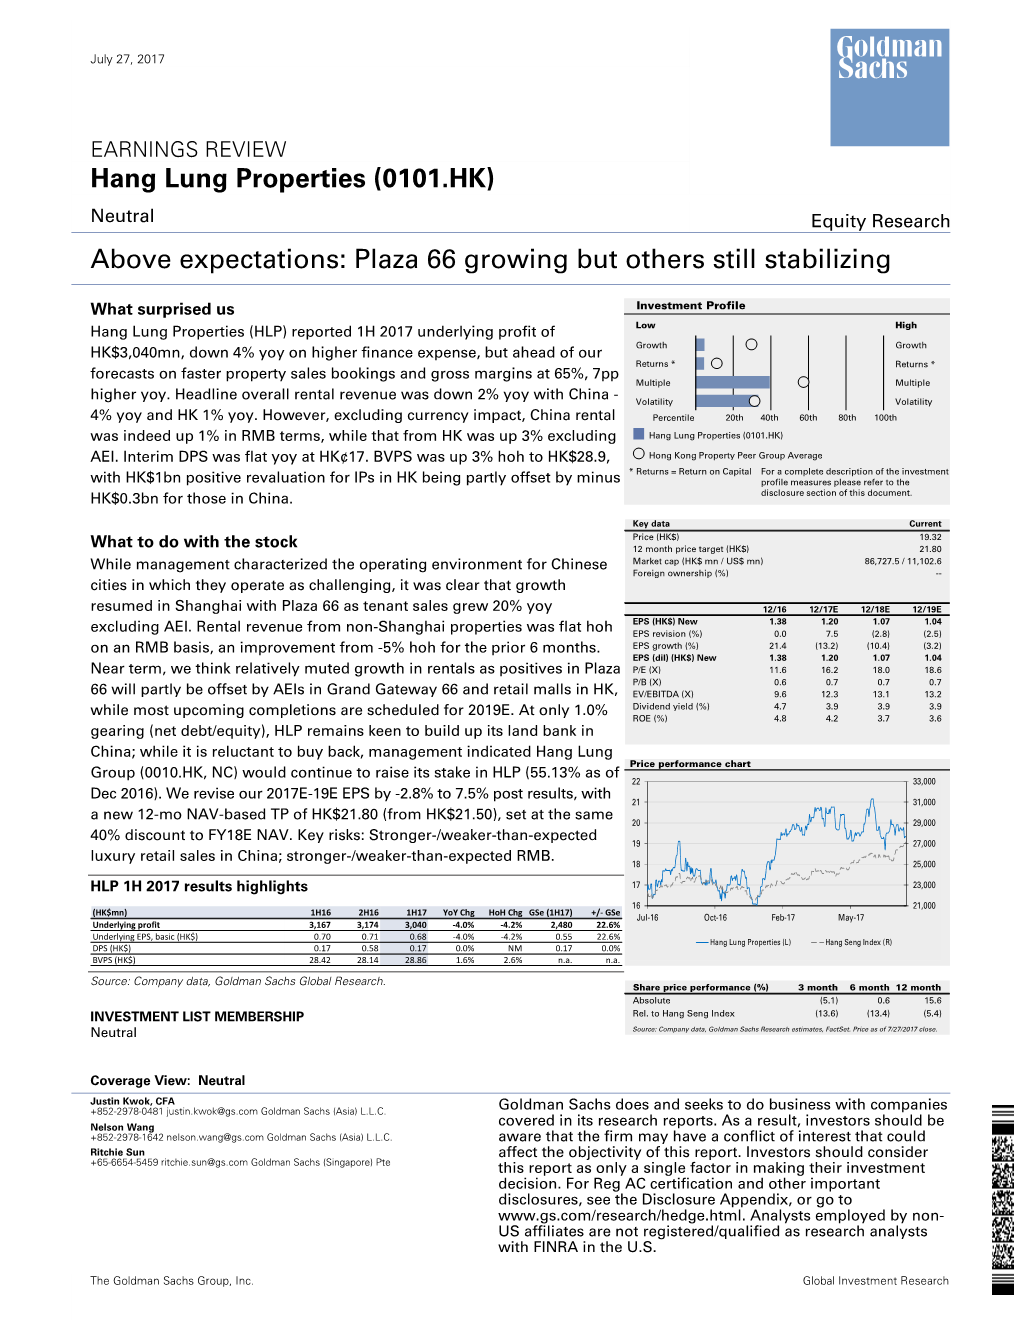 Hang Lung Properties (0101.HK) Above Expectations: Plaza 66